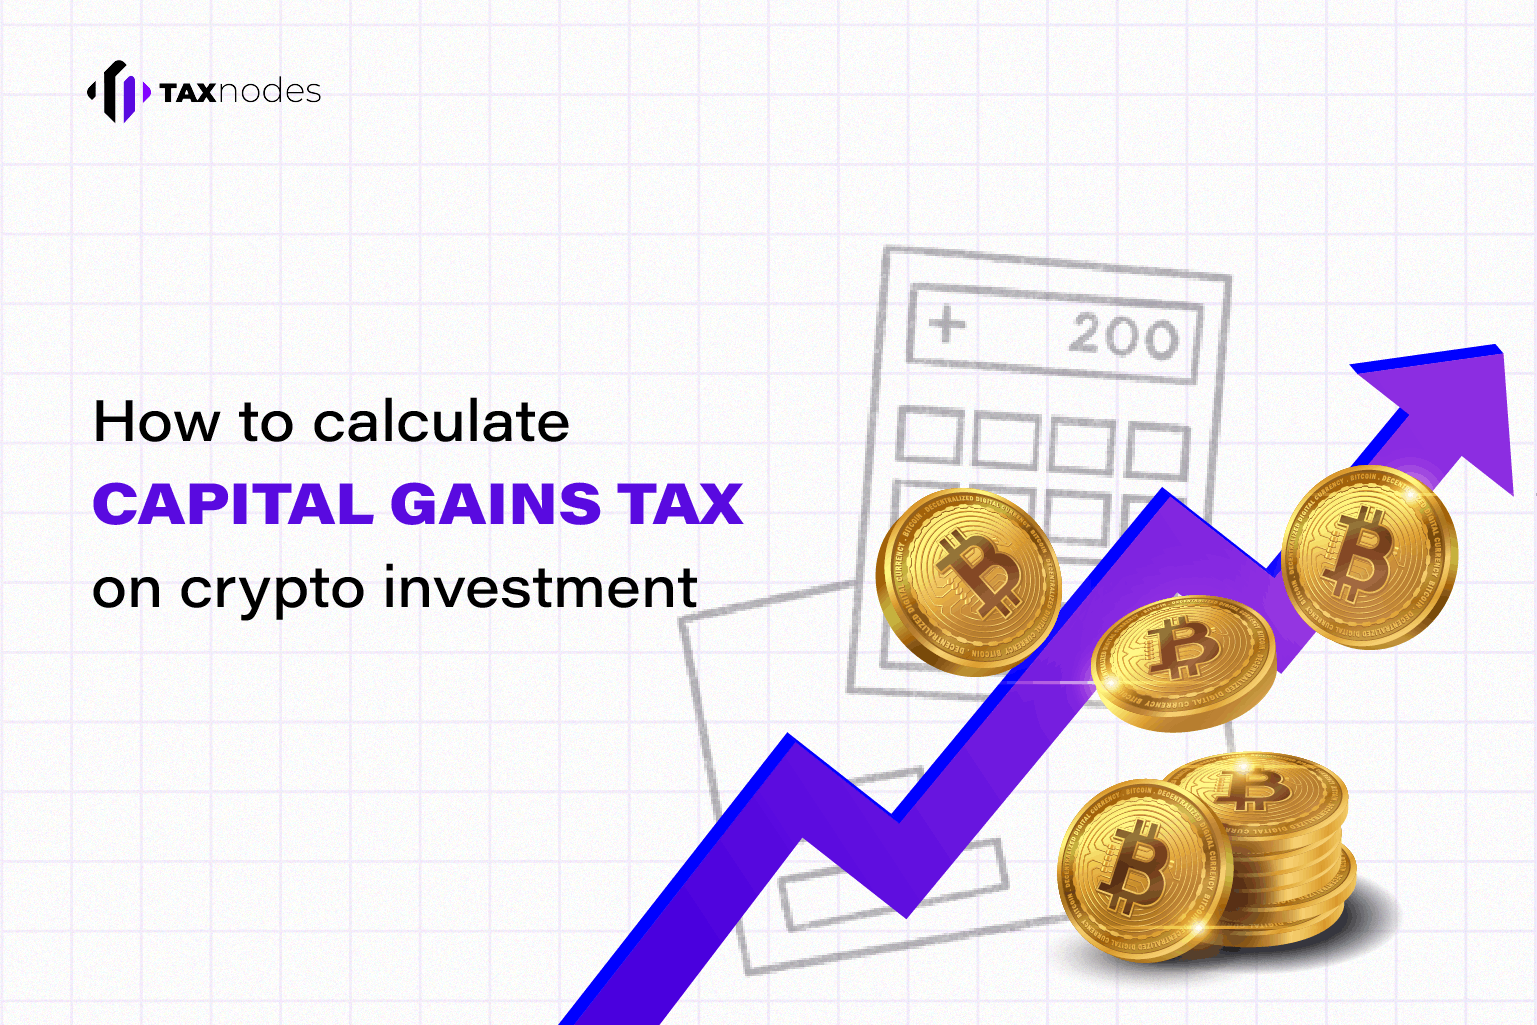 How to calculate capital gains on crypto investments